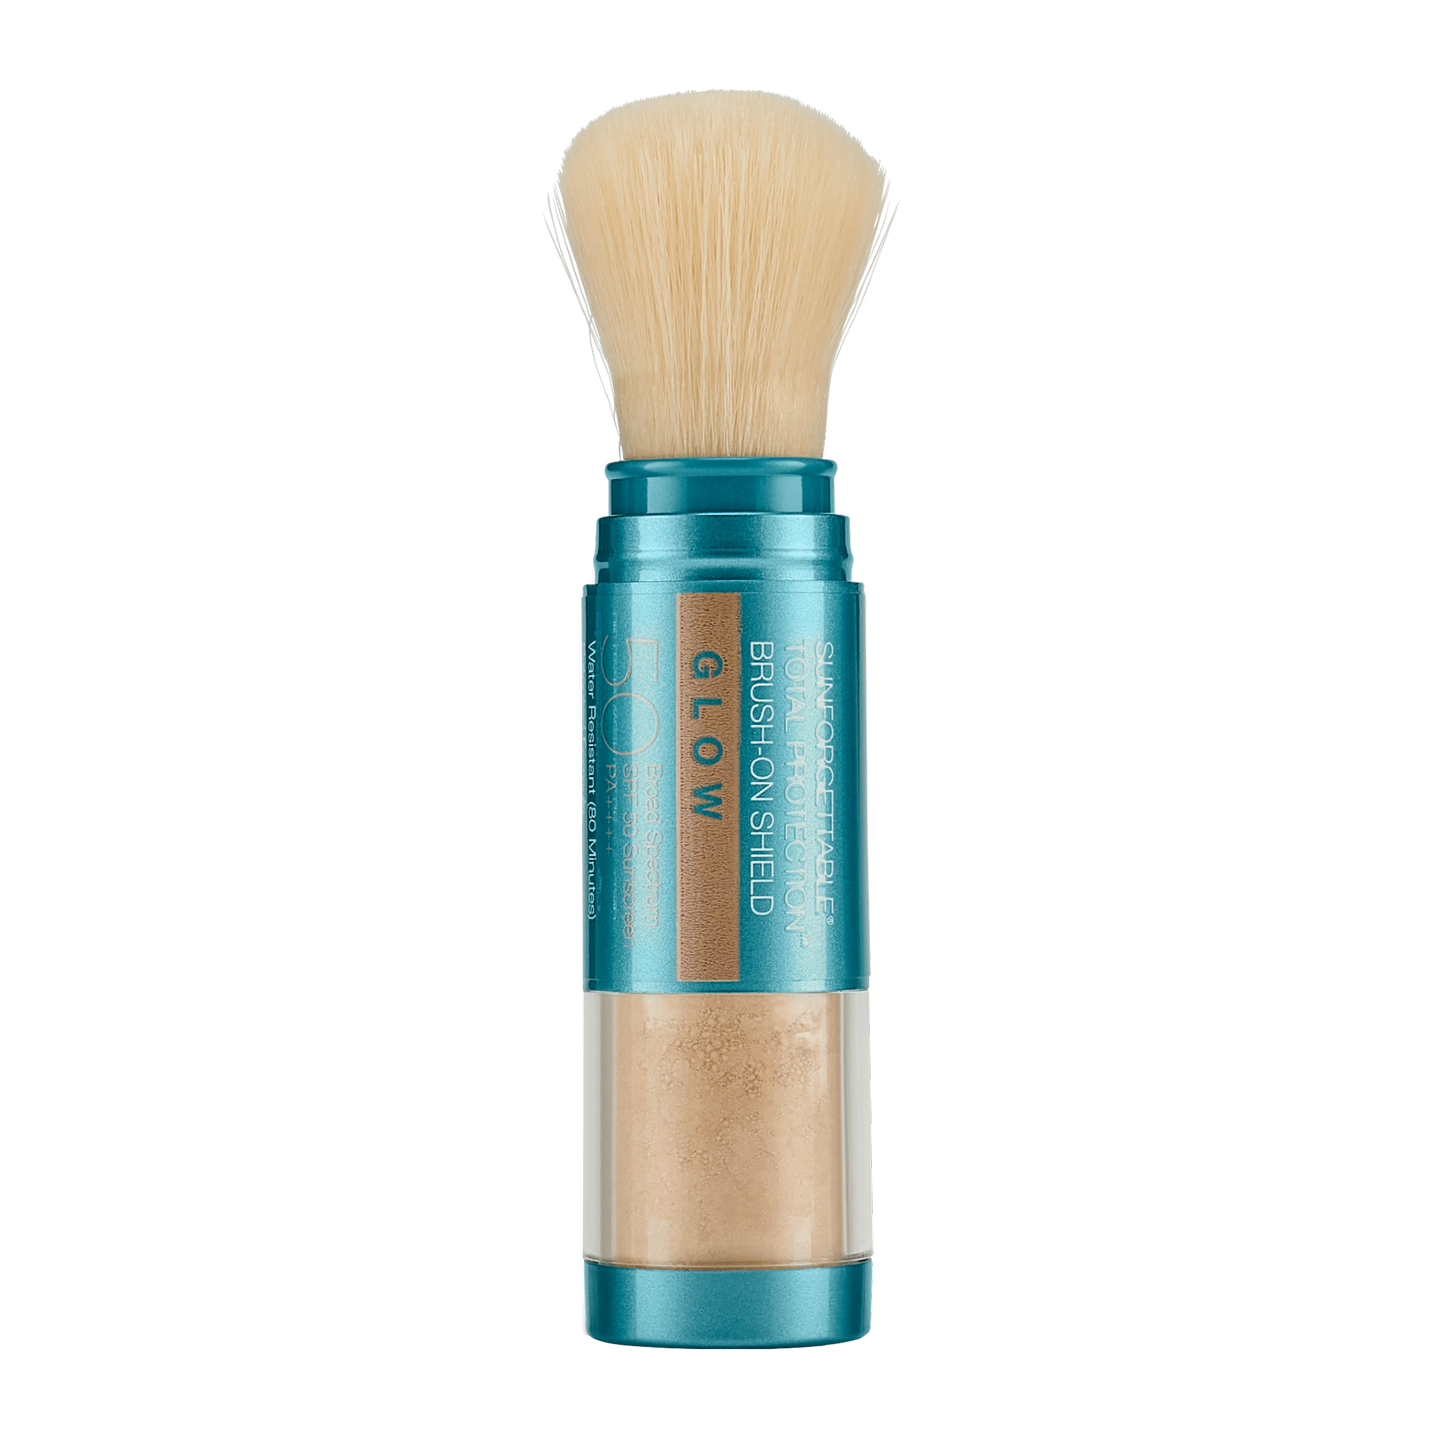 Colorescience Sunforgettable® Total Protection® Brush-On Shield Glow SPF 50